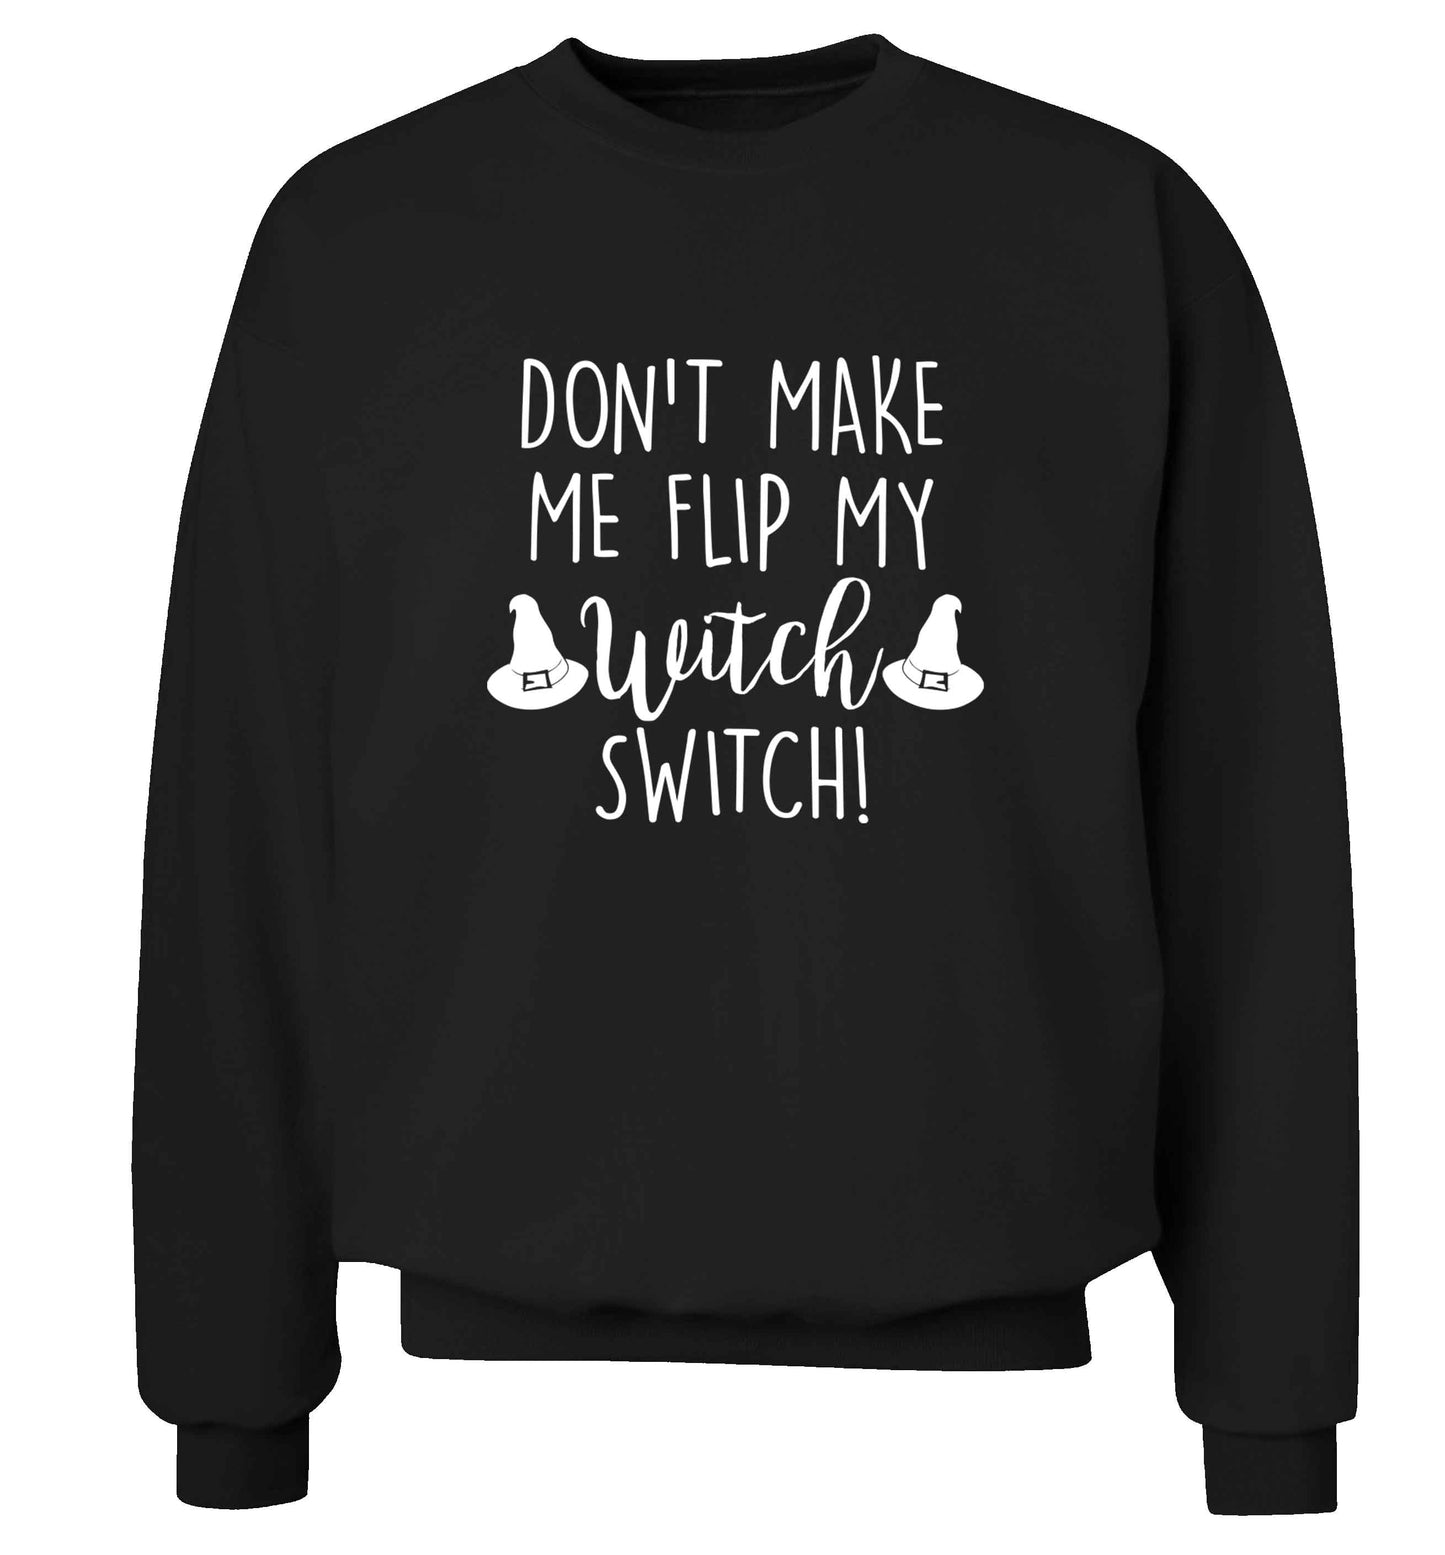 Don't make me flip my witch switch adult's unisex black sweater 2XL